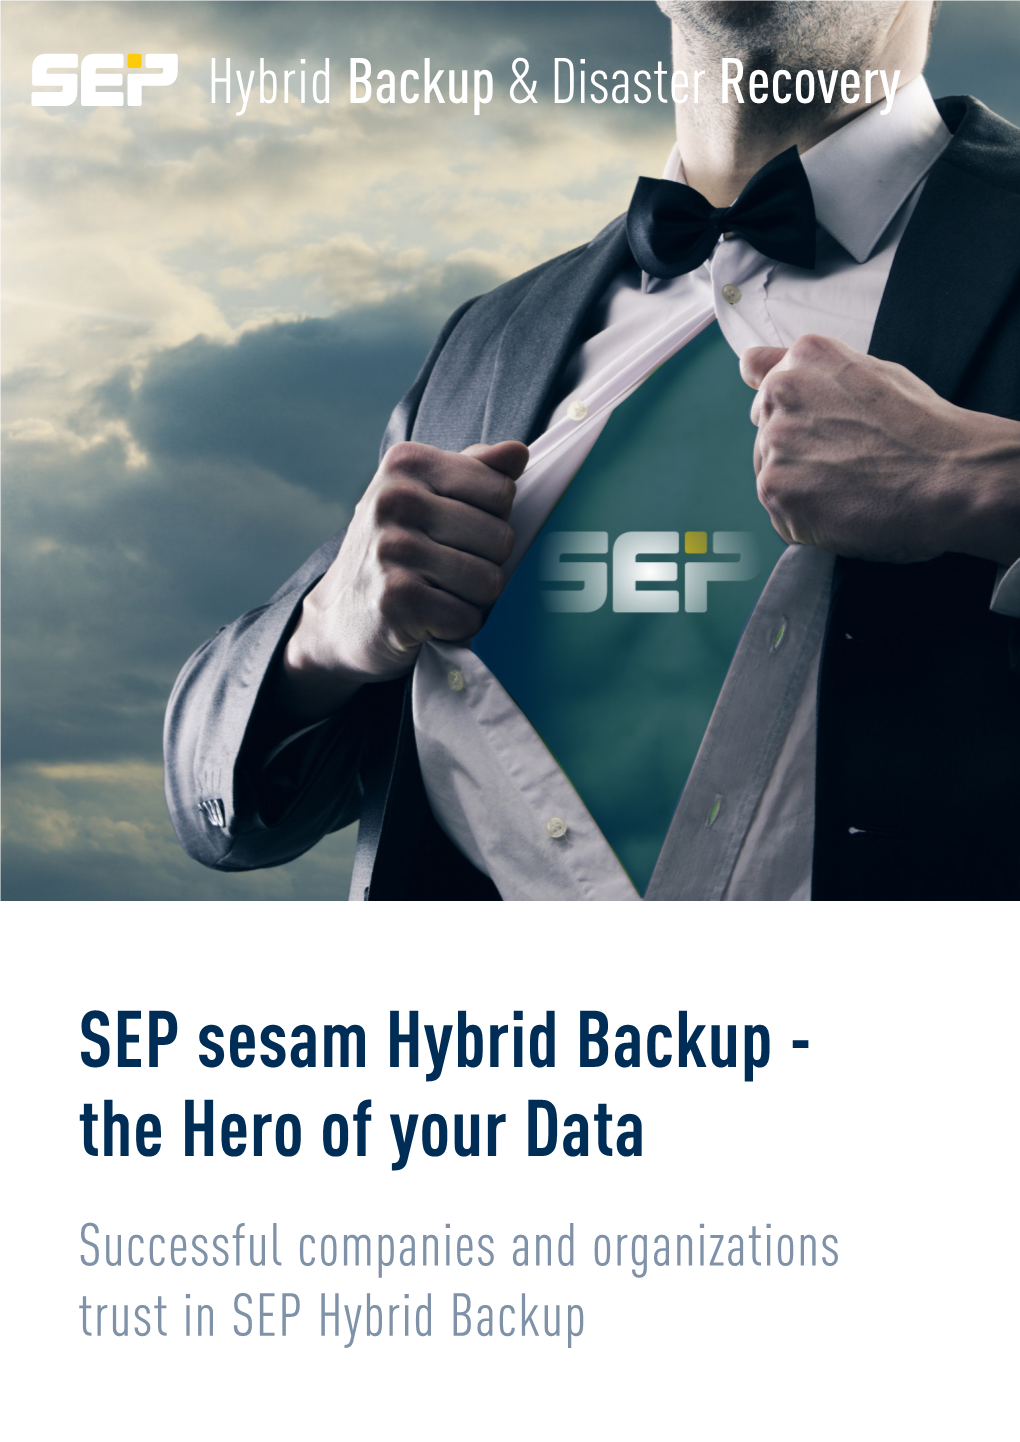 SEP Sesam Hybrid Backup and Disaster Recovery